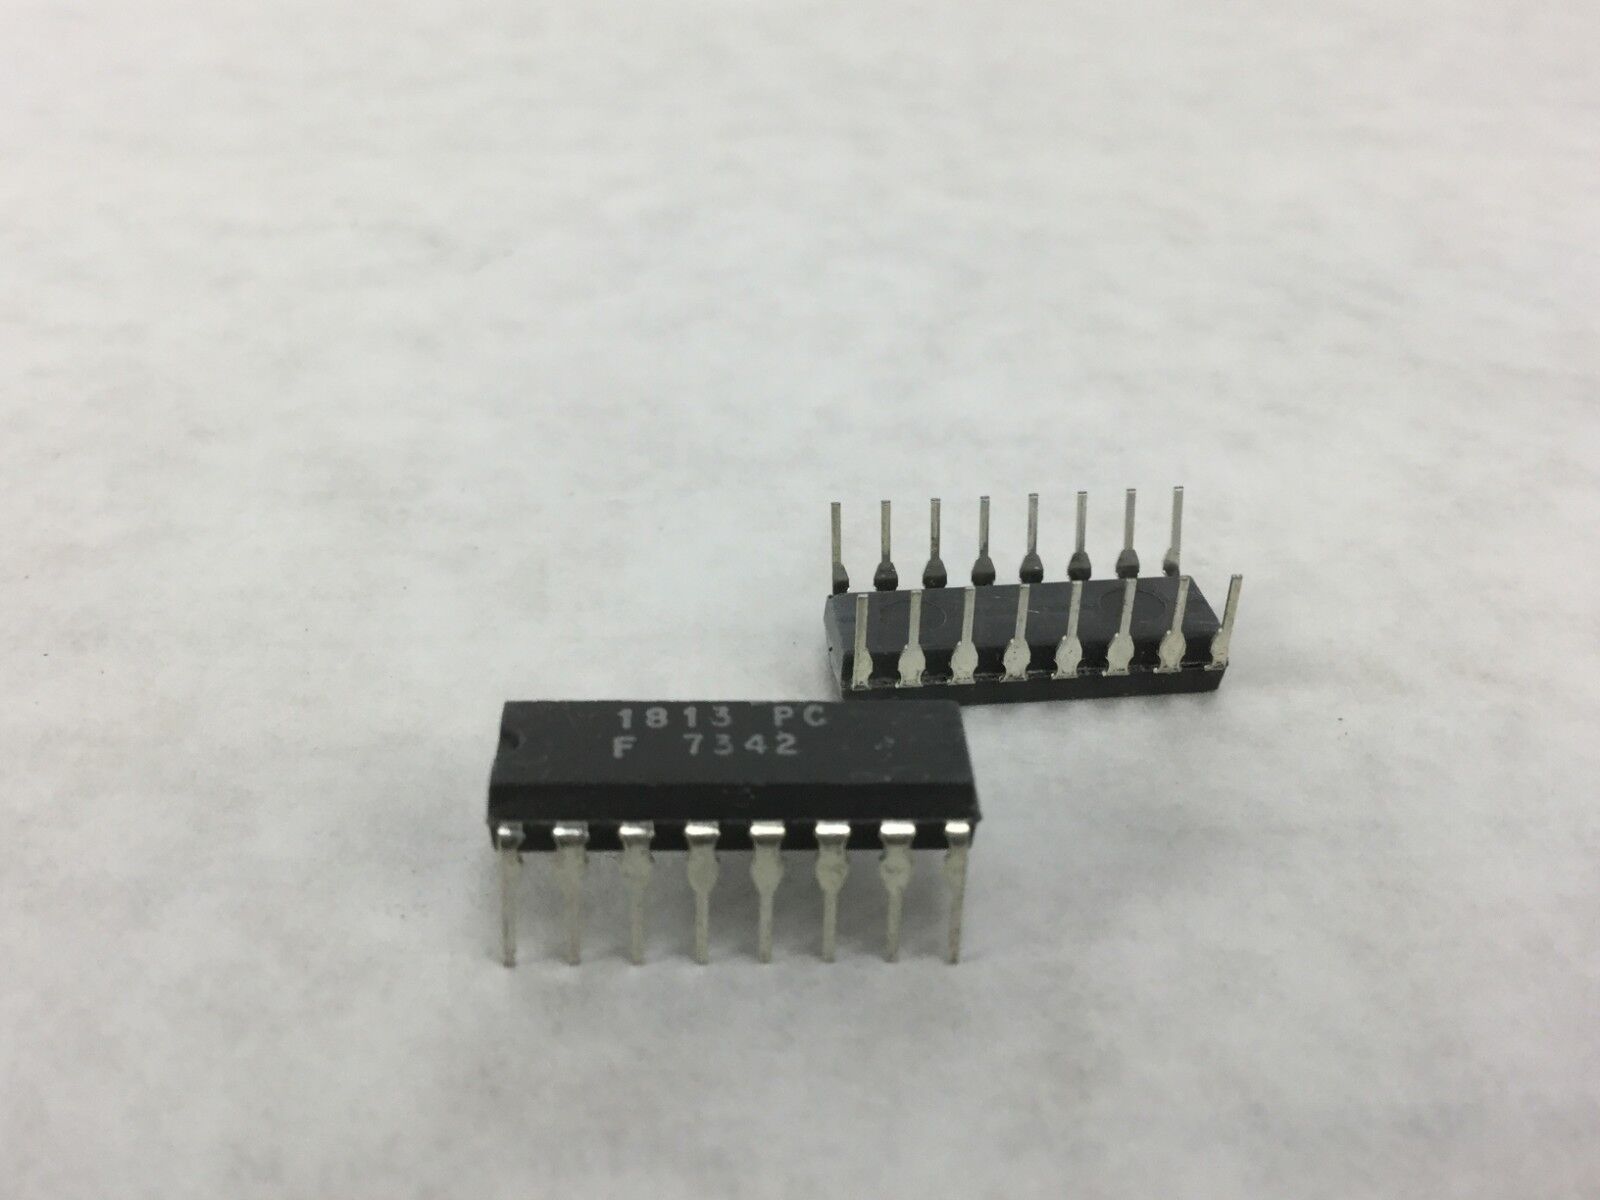 Genuine NEW FAIRCHILD 1813 PC  F 7342  16-Pin Dip Integrated Circuit  Lot of 10